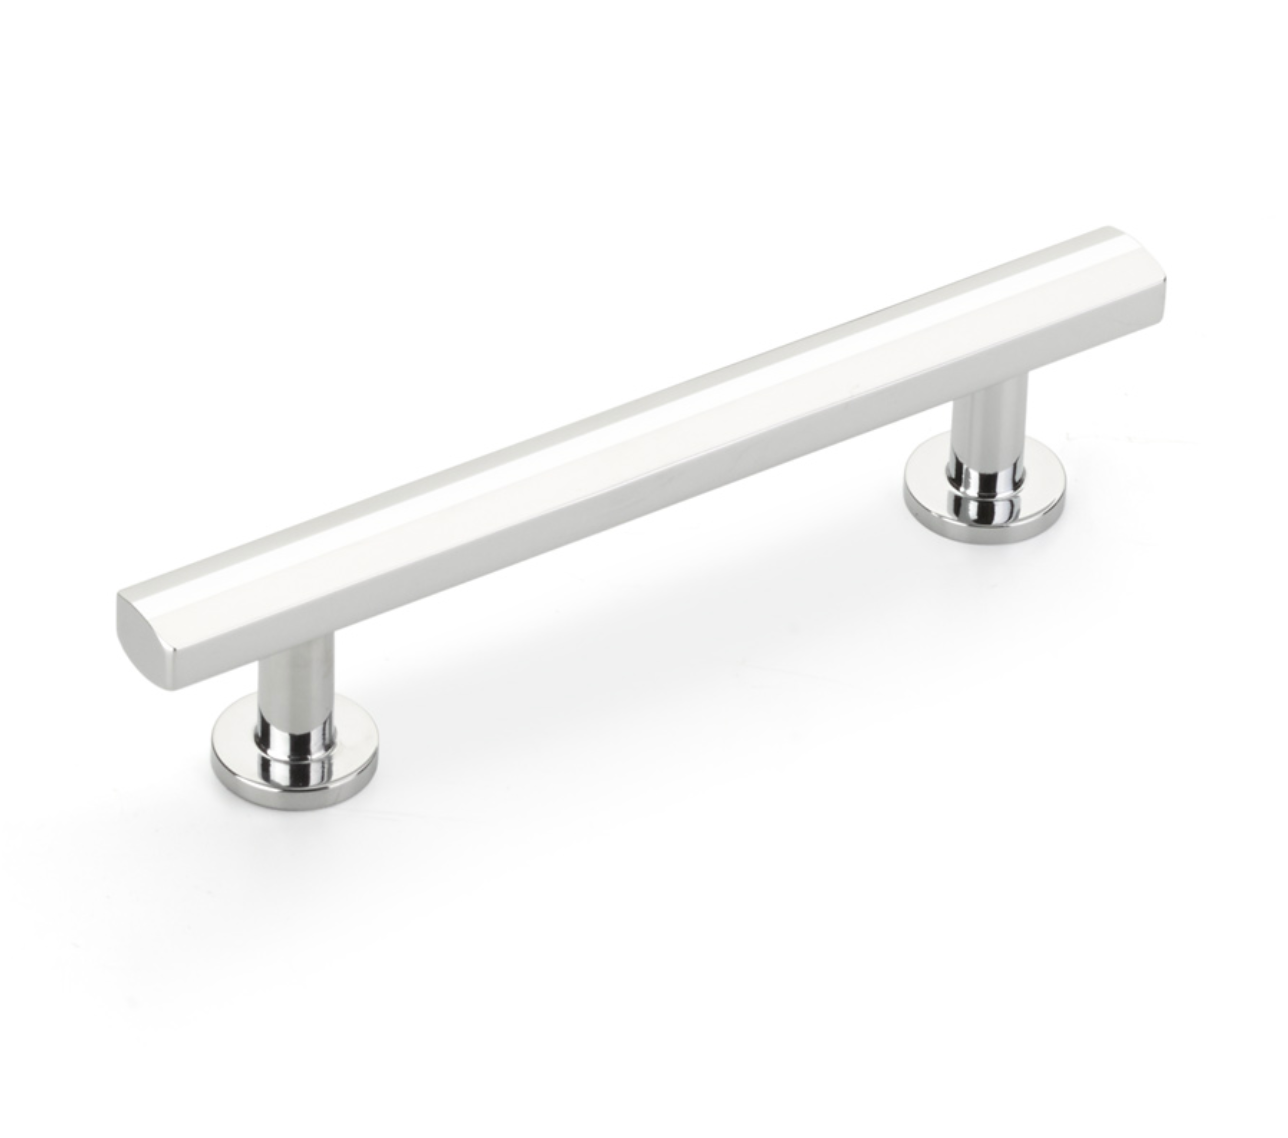 Polished Chrome "Heather" T-Bar Cabinet Knobs and Drawer Pulls